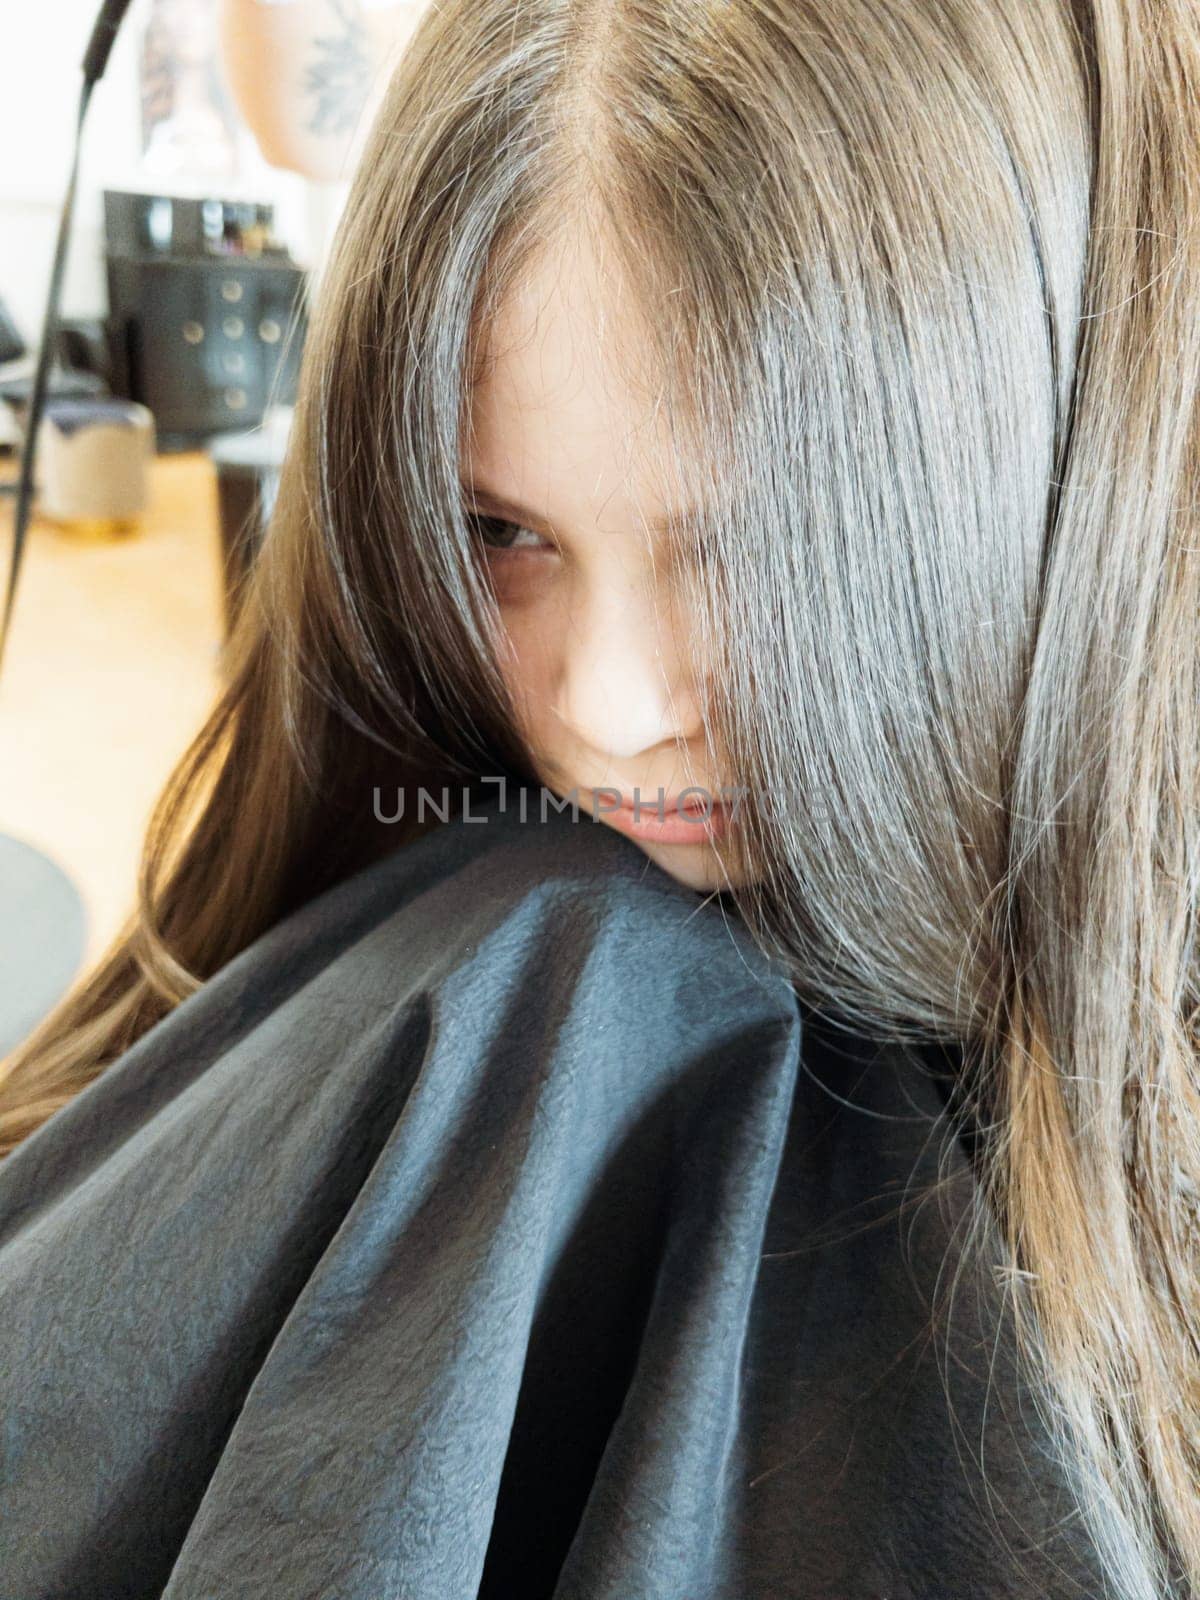 Gentle hands maneuver a hair dryer through a young girl's newly cut hair, showcasing the drying process after a meticulous trim. The warmth of the dryer breathes life into her locks, as they transform from damp to styled with care and expertise.